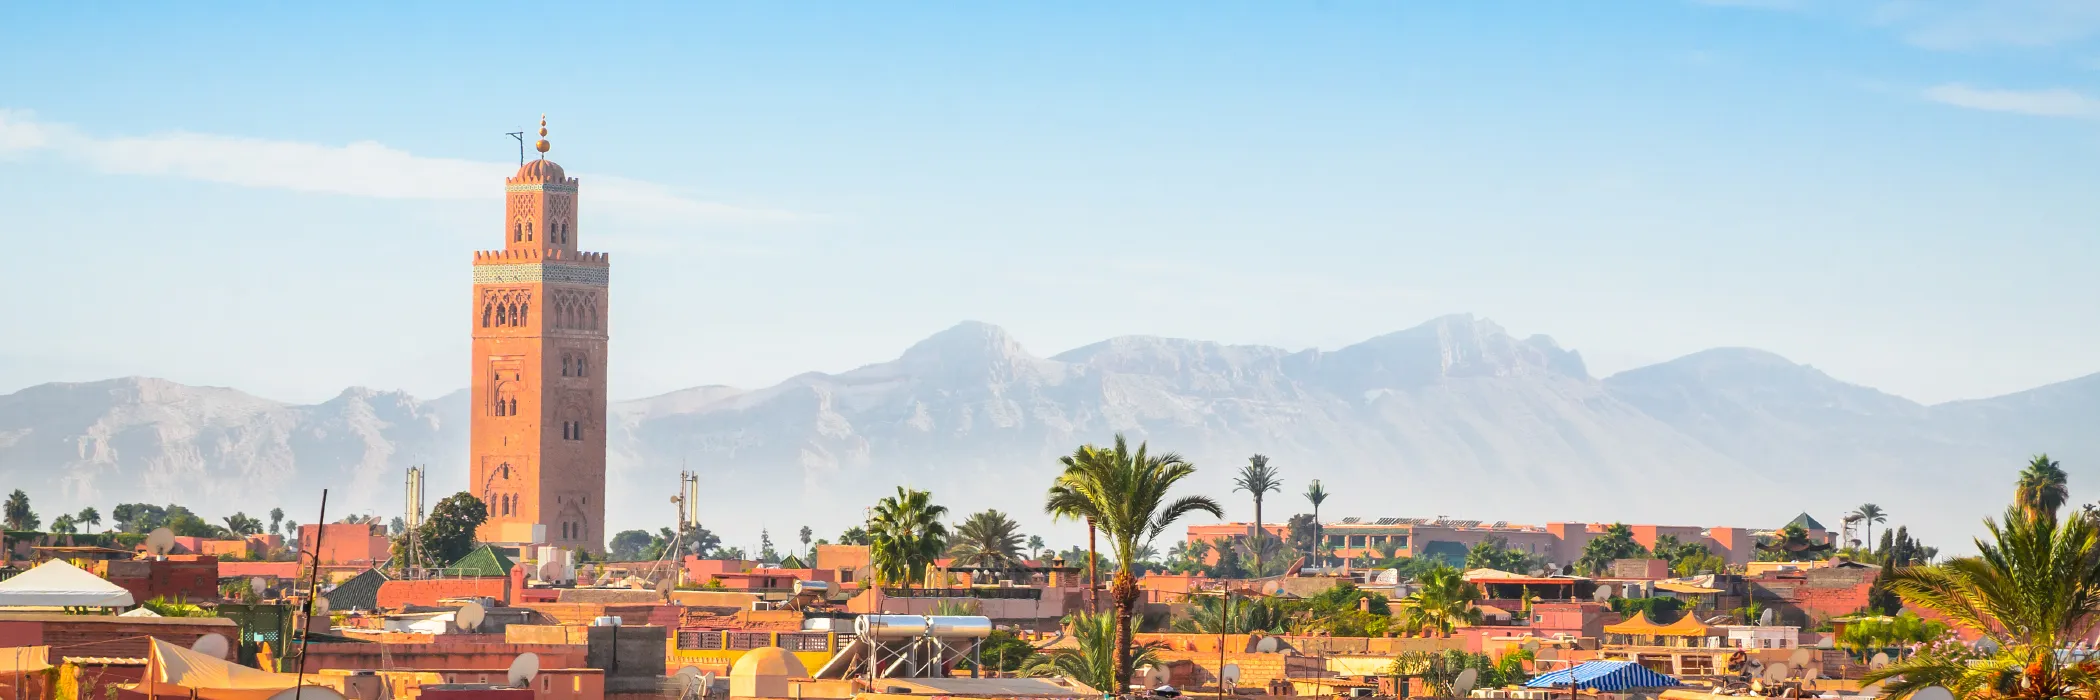 All Inclusive Morocco Holidays - View of Marrakech